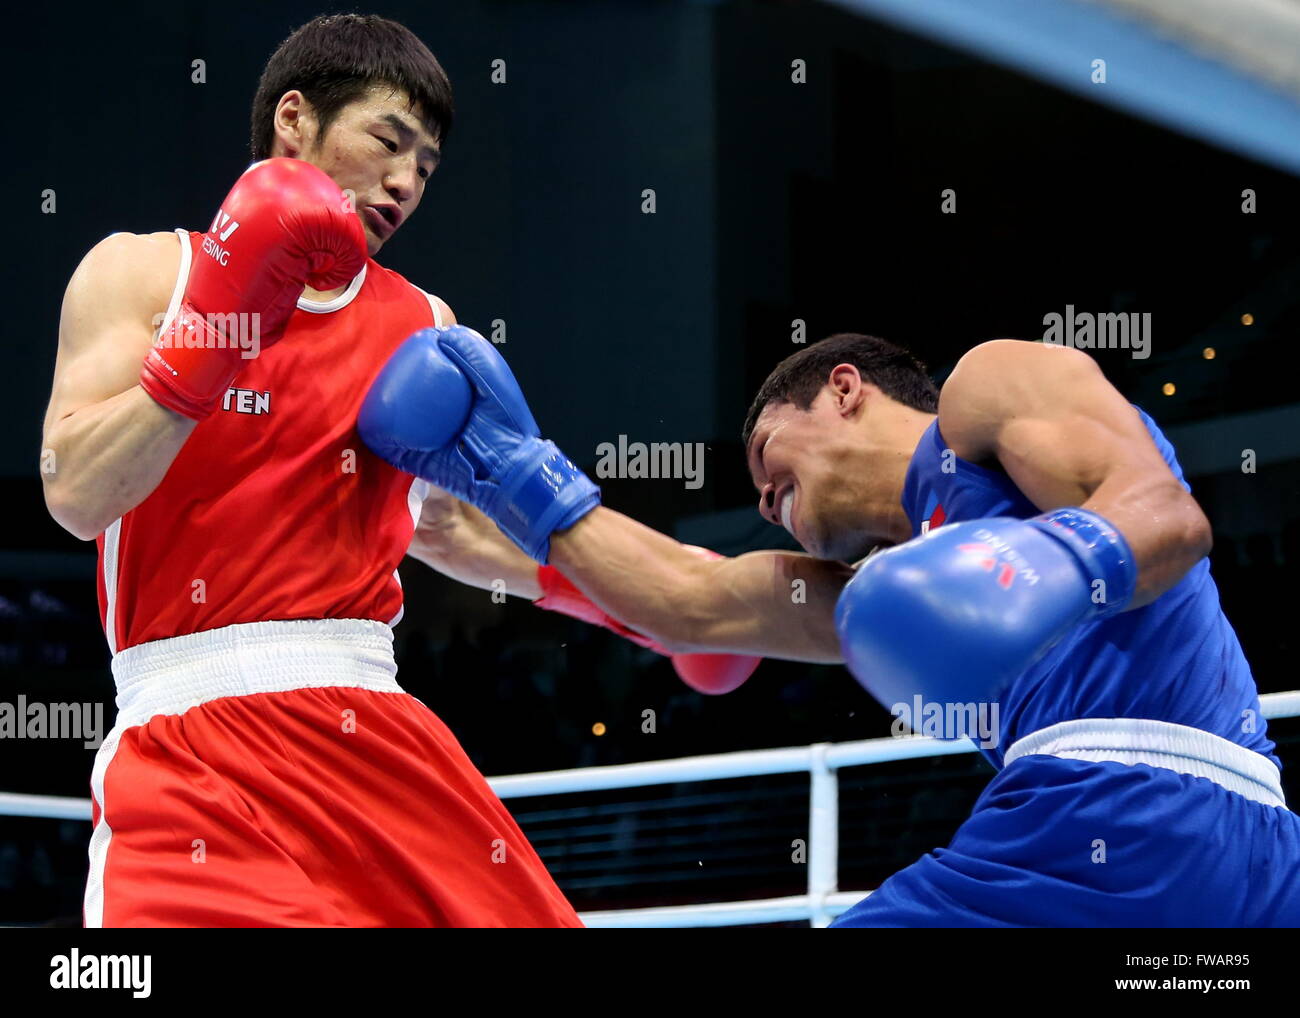 Qian'an, China's Hebei Province. 2nd Apr, 2016. Otgondalai Dorjnymuu (L) of Mongolia competes against Charly Coronel Suarez of the Philippines during the final match of the men's 60kg category competition at the Asia/Oceania Zone boxing event qualifier for 2016 Rio Olympic Games in Qian'an, north China's Hebei Province, April 2, 2016. Dorjnymuu won 2-1 to claim the title. © Yang Shiyao/Xinhua/Alamy Live News Stock Photo